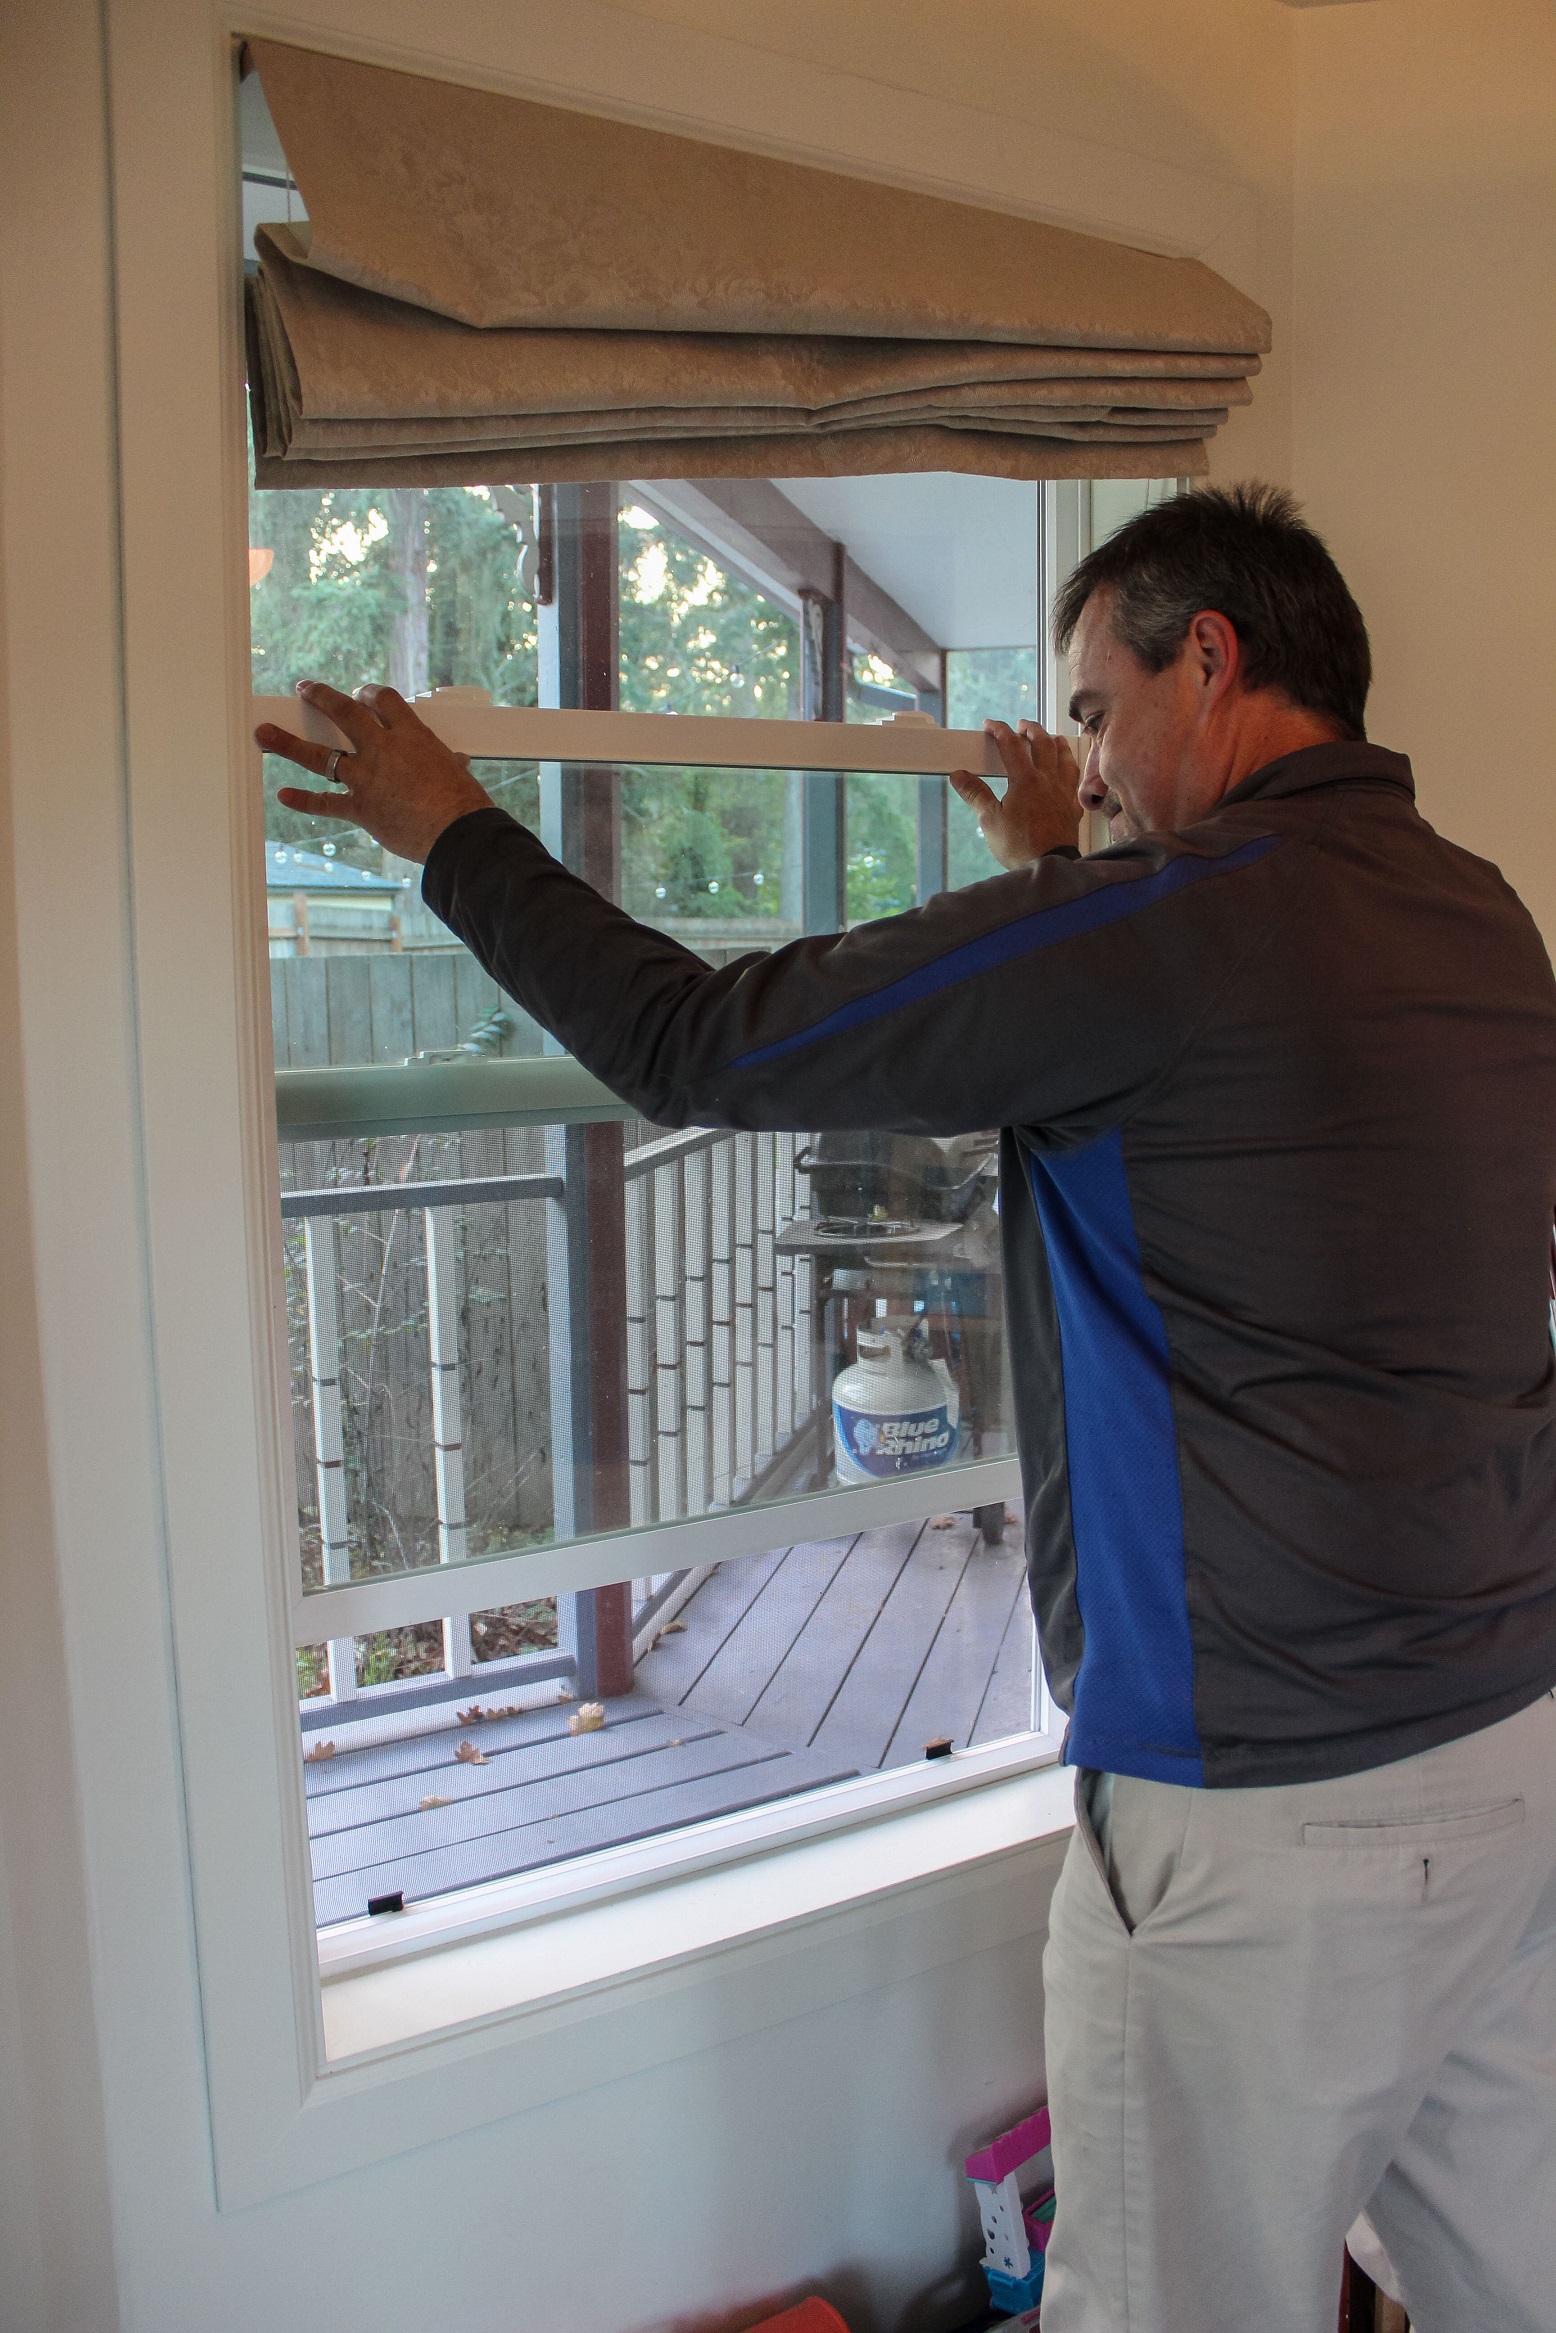 Boggs Inspection Services Now Offering Energy Assessments to South Sound  Homes - ThurstonTalk